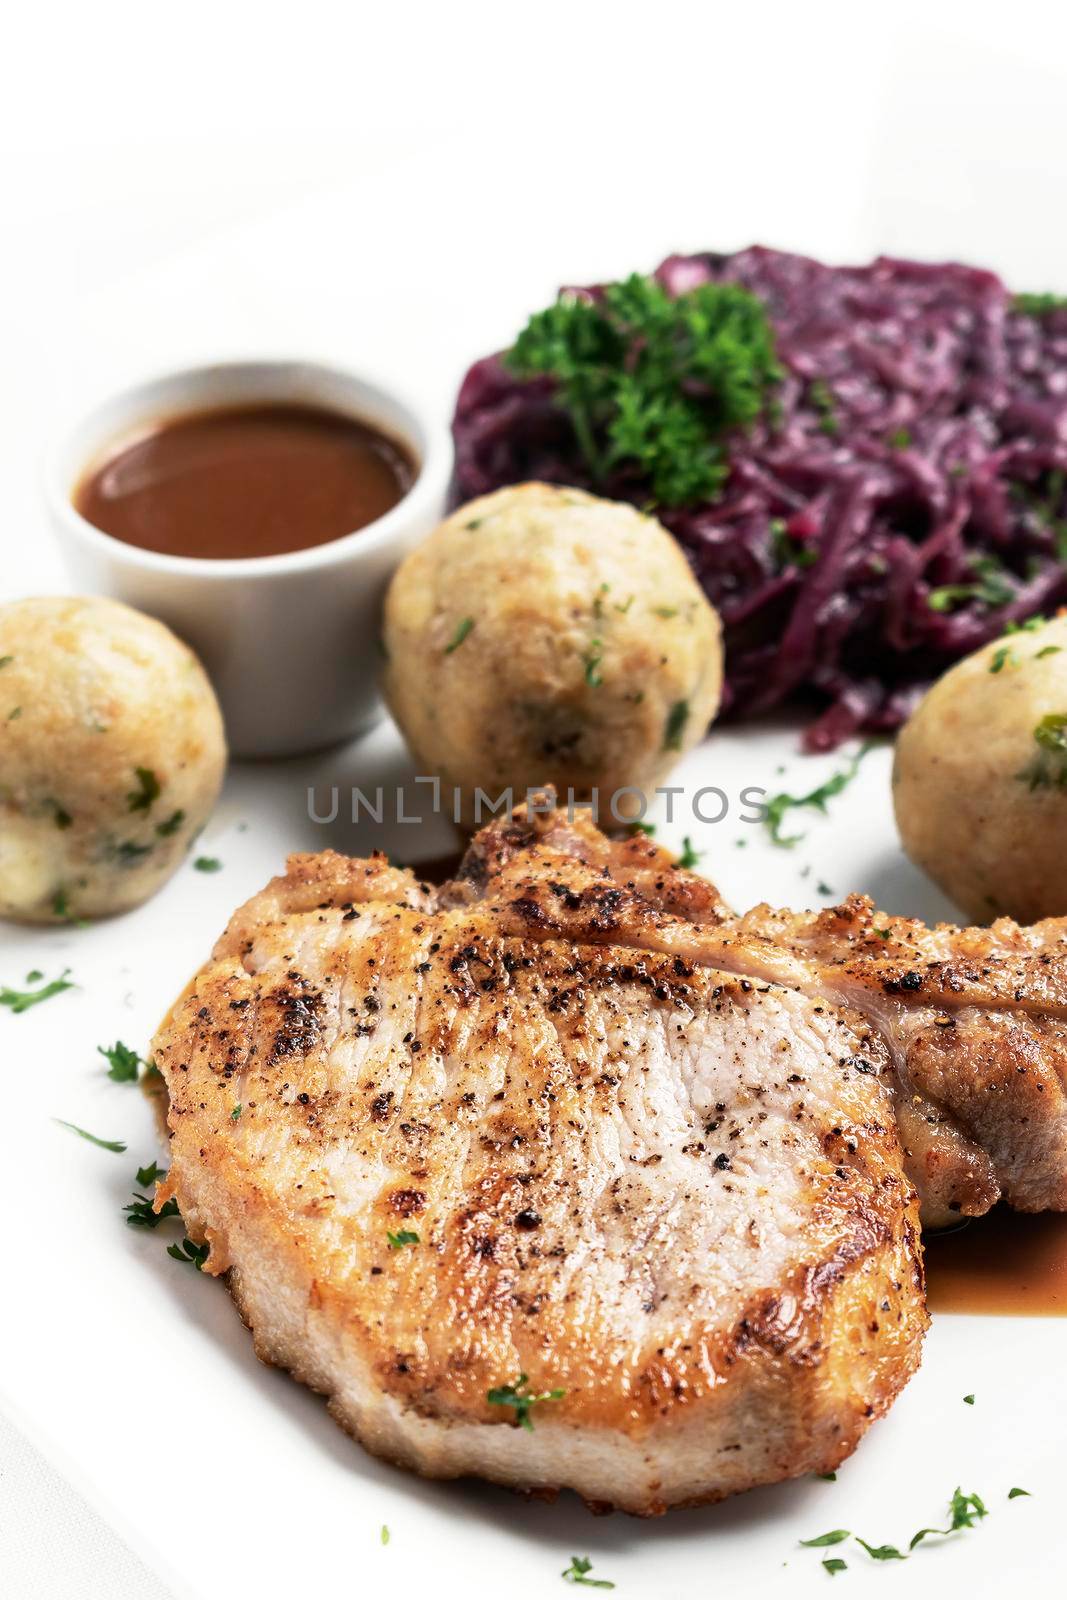 german style grilled pork chop with bread dumplings traditional meal by jackmalipan